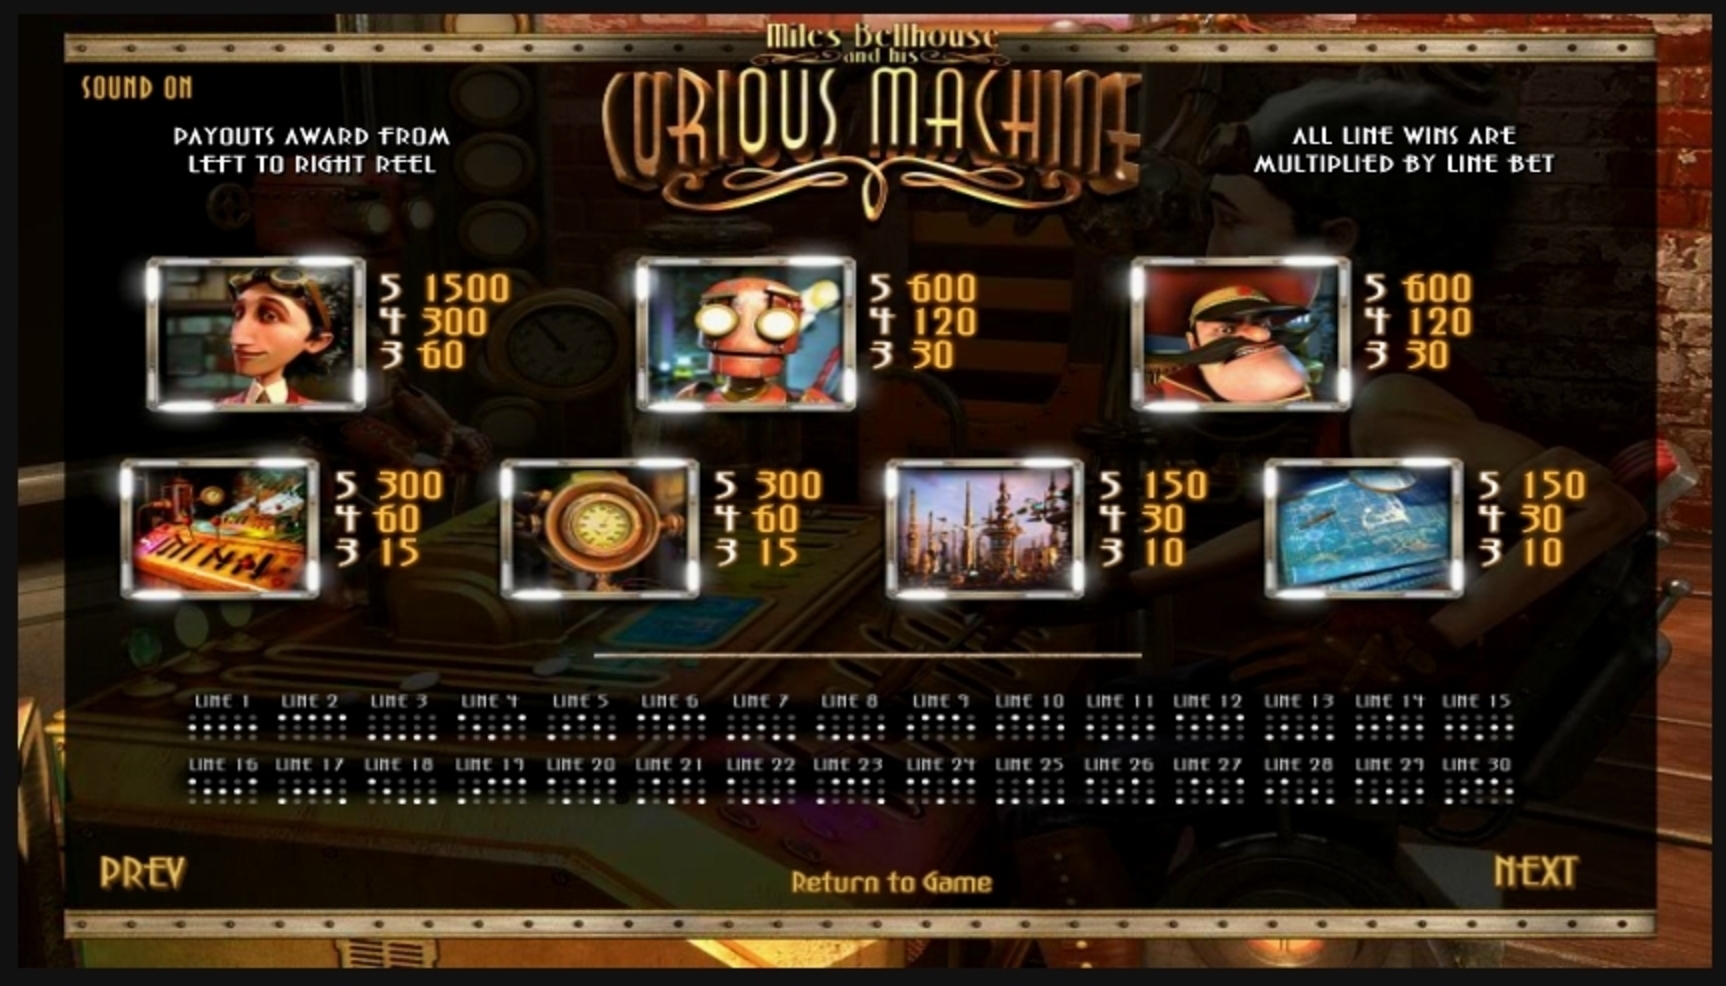 Info of The Curious Machine Slot Game by Betsoft